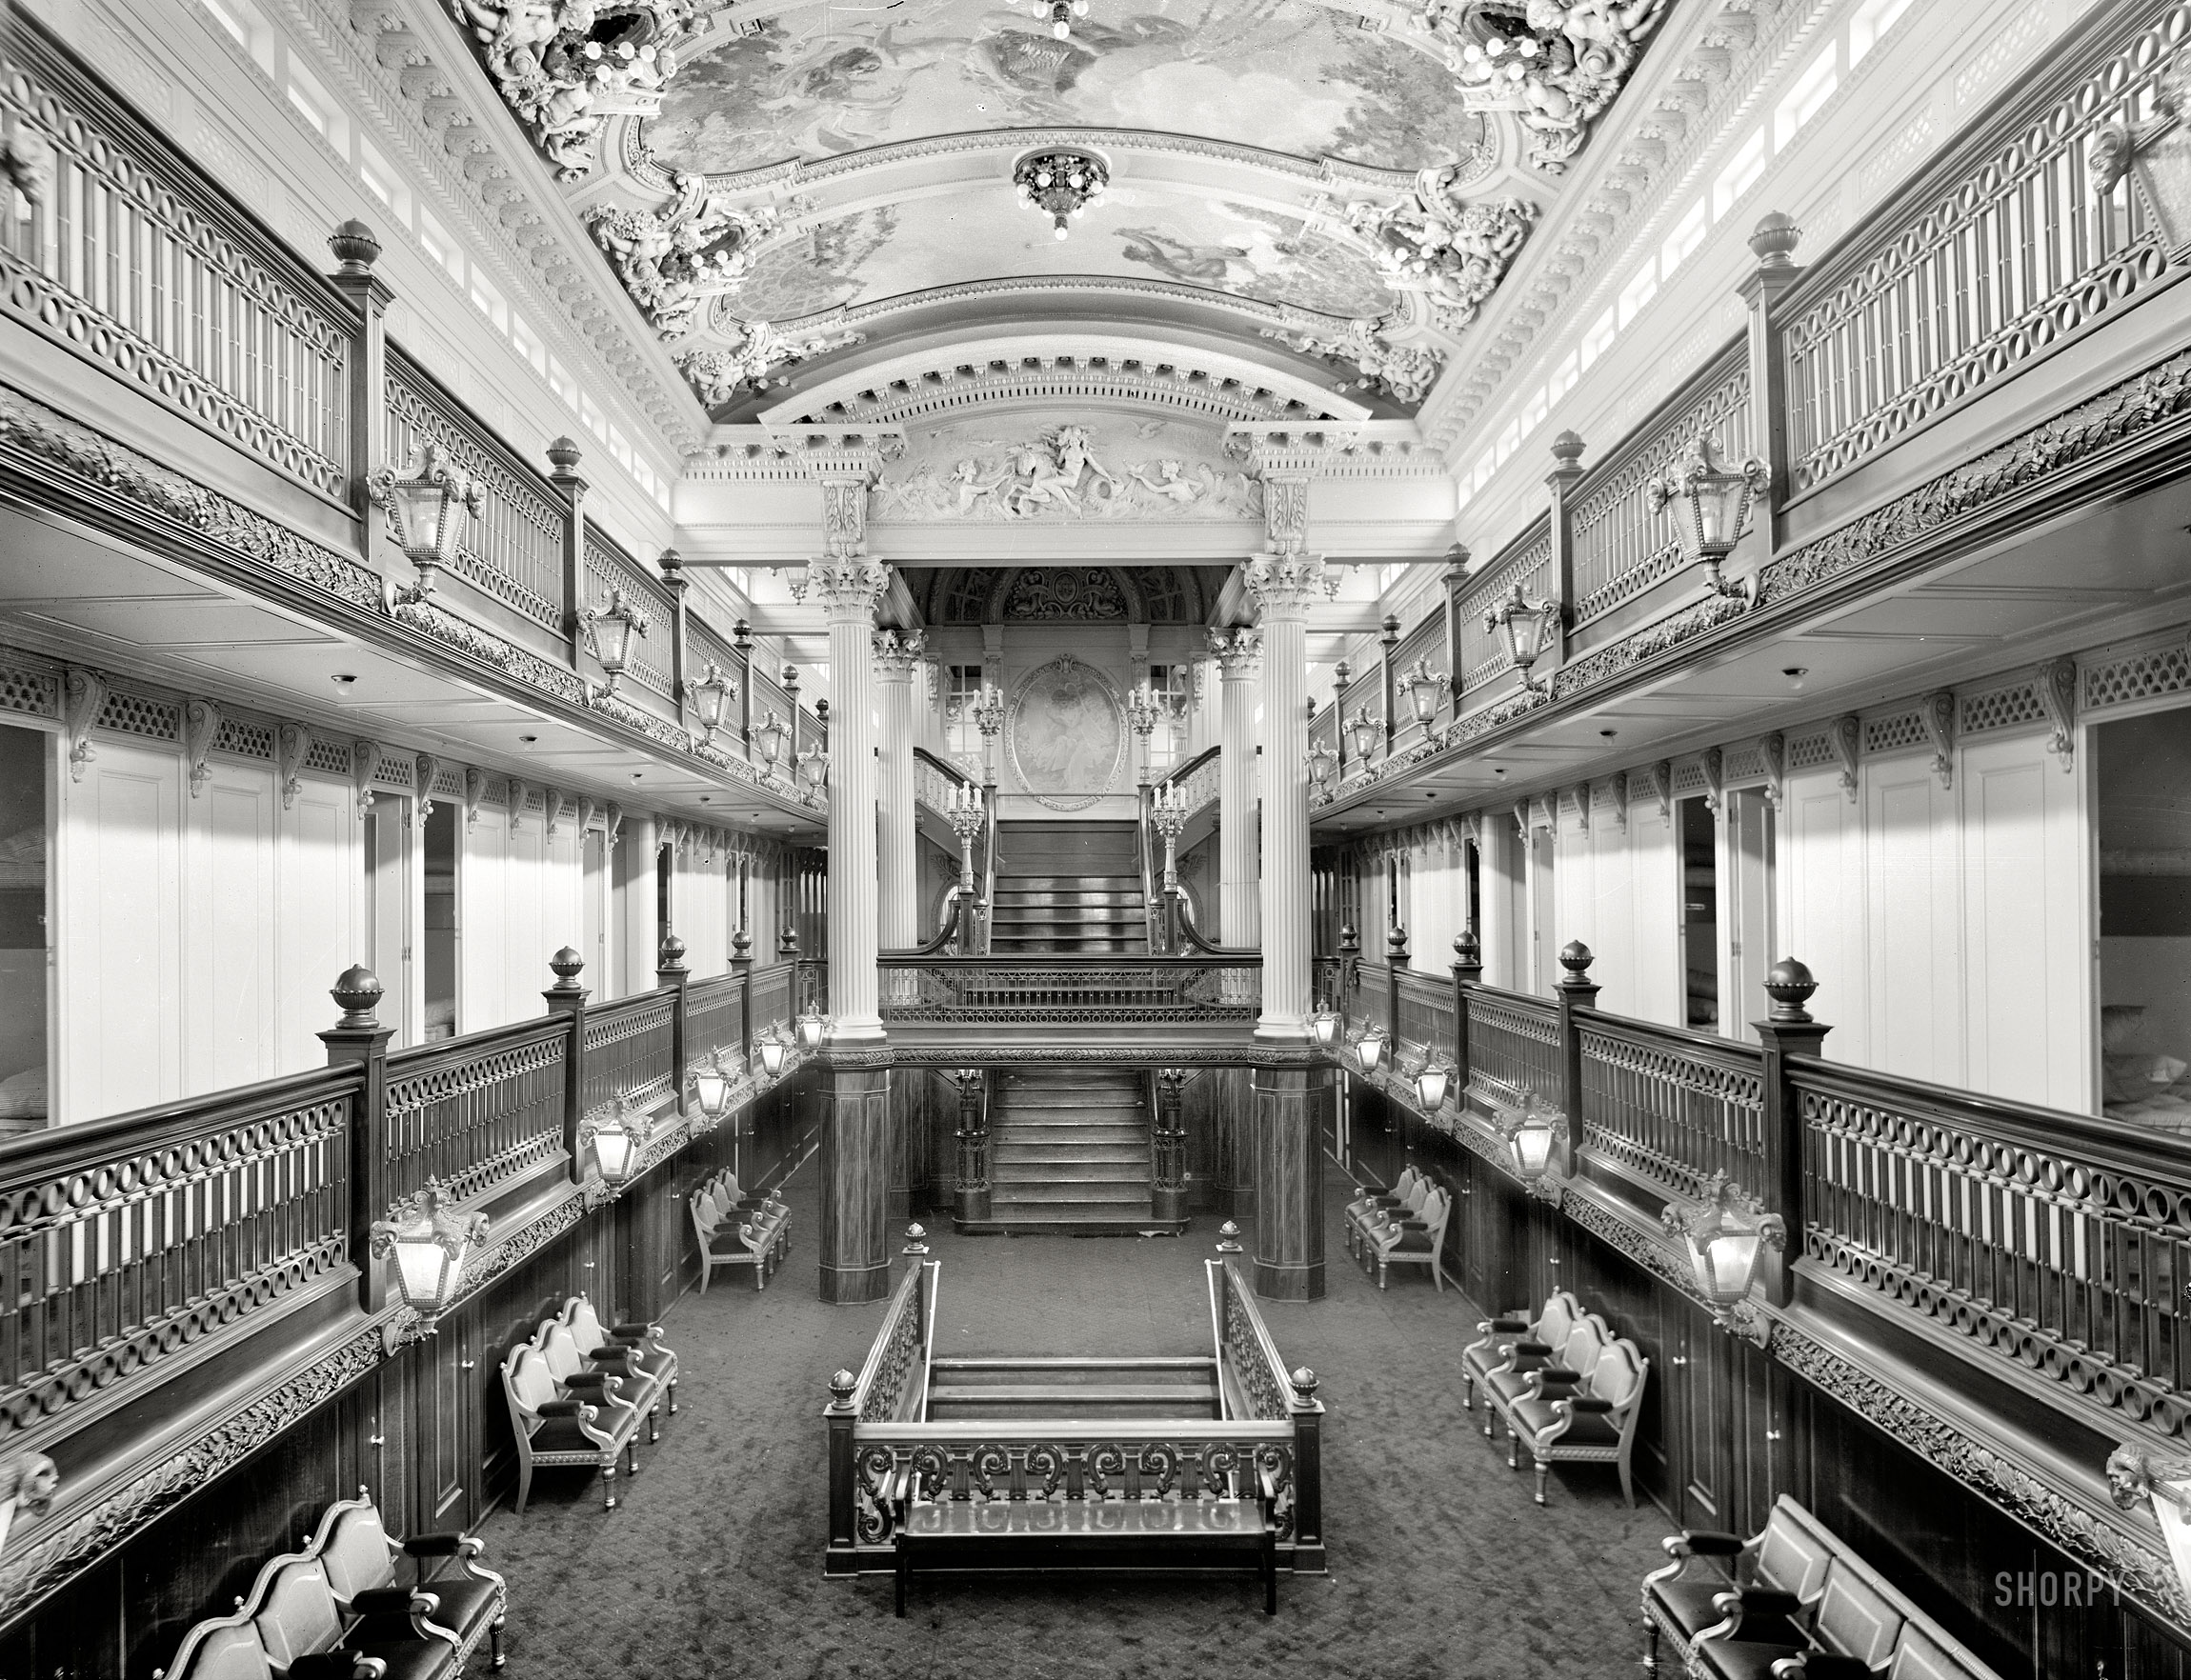 Circa 1912. "Steamer City of Detroit III, grand salon, looking forward." 8x10 inch dry plate glass negative, Detroit Publishing Company. View full size.